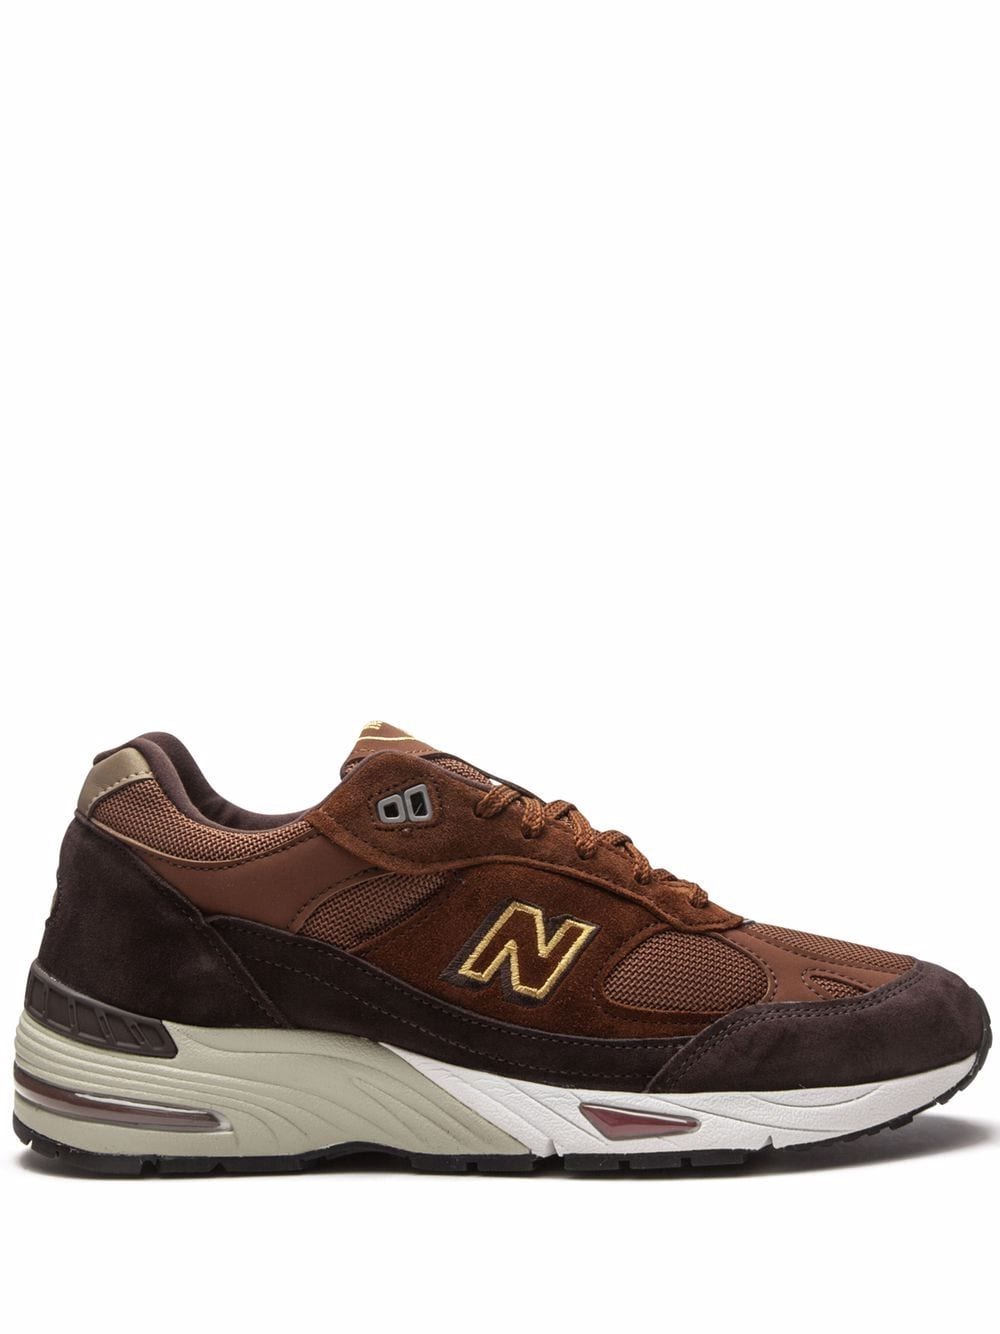 New Balance 991 "Year of the Ox" sneakers - Brown